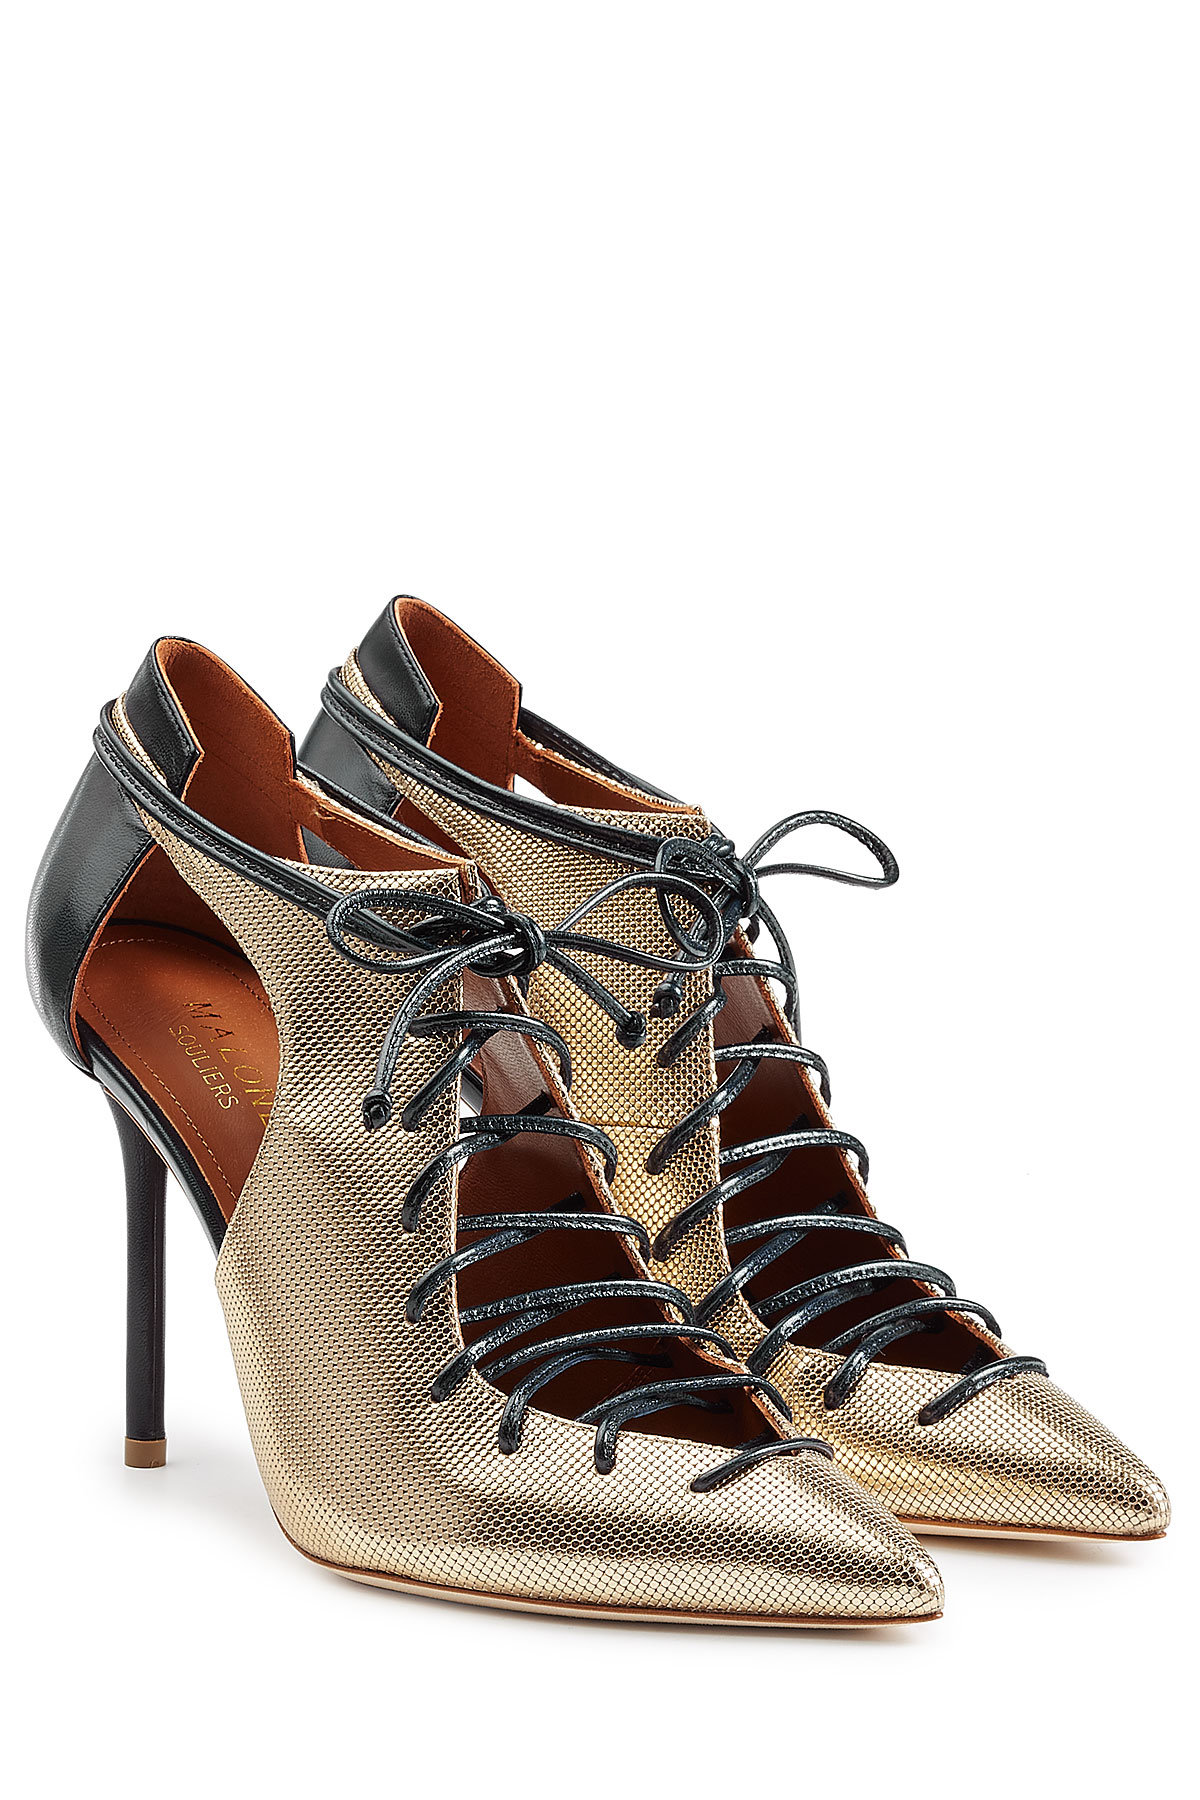 Malone Souliers - Metallic Leather Lace-Up Pumps with Cutouts